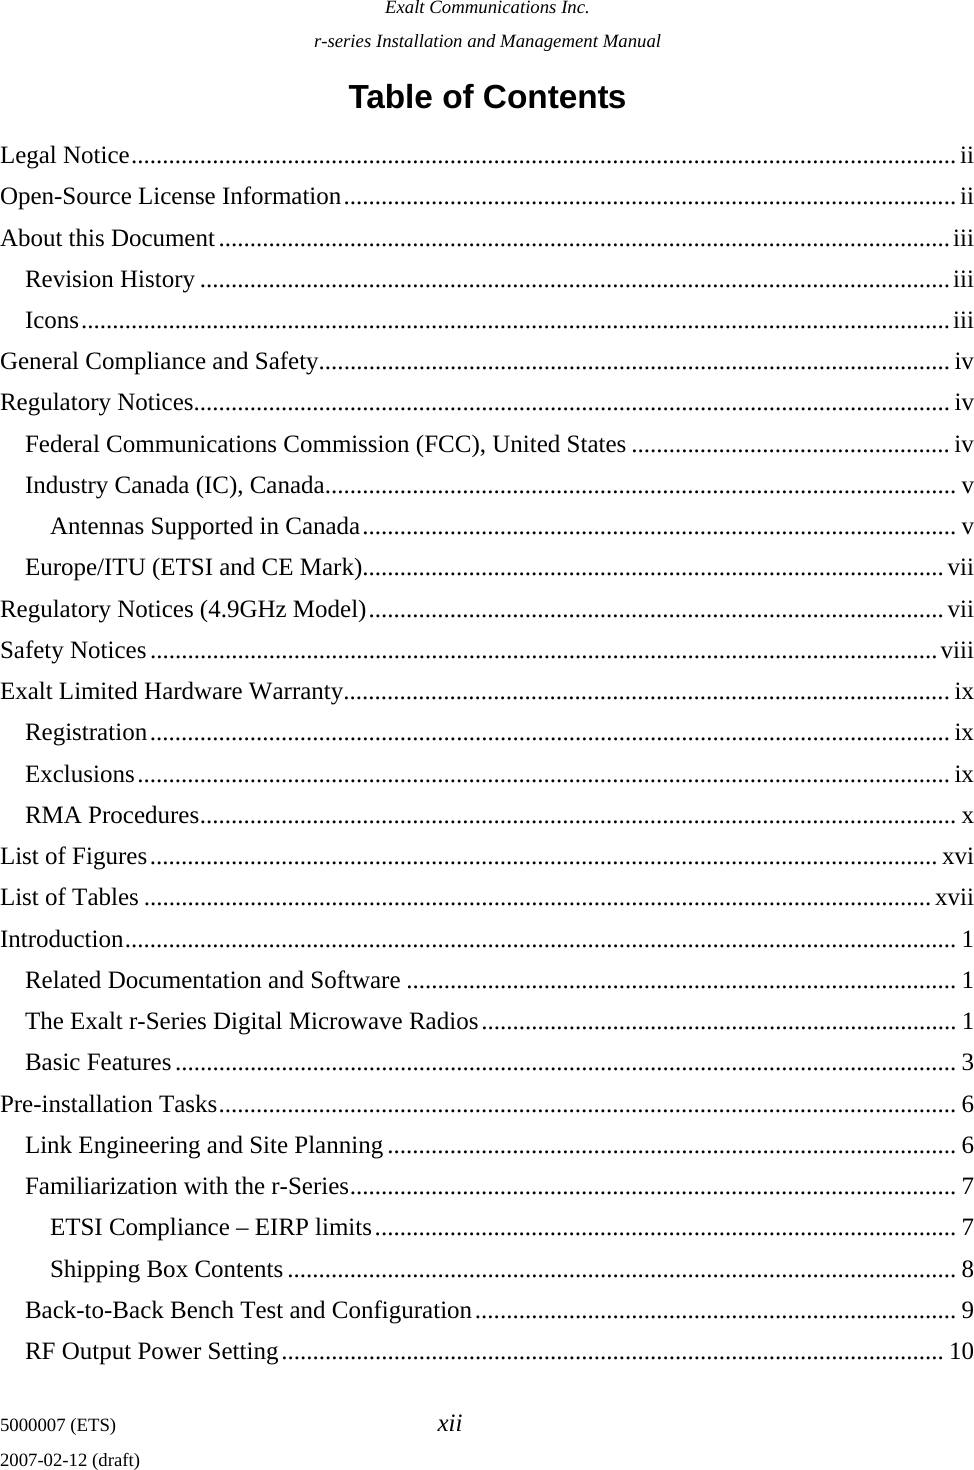 Exalt Communications Inc. r-series Installation and Management Manual 5000007 (ETS)  xii 2007-02-12 (draft) Table of Contents Legal Notice....................................................................................................................................ii Open-Source License Information..................................................................................................ii About this Document.....................................................................................................................iii Revision History ........................................................................................................................iii Icons...........................................................................................................................................iii General Compliance and Safety..................................................................................................... iv Regulatory Notices......................................................................................................................... iv Federal Communications Commission (FCC), United States ................................................... iv Industry Canada (IC), Canada..................................................................................................... v Antennas Supported in Canada............................................................................................... v Europe/ITU (ETSI and CE Mark).............................................................................................vii Regulatory Notices (4.9GHz Model)............................................................................................vii Safety Notices..............................................................................................................................viii Exalt Limited Hardware Warranty.................................................................................................ix Registration................................................................................................................................ ix Exclusions.................................................................................................................................. ix RMA Procedures......................................................................................................................... x List of Figures.............................................................................................................................. xvi List of Tables ..............................................................................................................................xvii Introduction..................................................................................................................................... 1 Related Documentation and Software ........................................................................................ 1 The Exalt r-Series Digital Microwave Radios............................................................................ 1 Basic Features............................................................................................................................. 3 Pre-installation Tasks...................................................................................................................... 6 Link Engineering and Site Planning ........................................................................................... 6 Familiarization with the r-Series................................................................................................. 7 ETSI Compliance – EIRP limits............................................................................................. 7 Shipping Box Contents ...........................................................................................................8 Back-to-Back Bench Test and Configuration............................................................................. 9 RF Output Power Setting.......................................................................................................... 10 